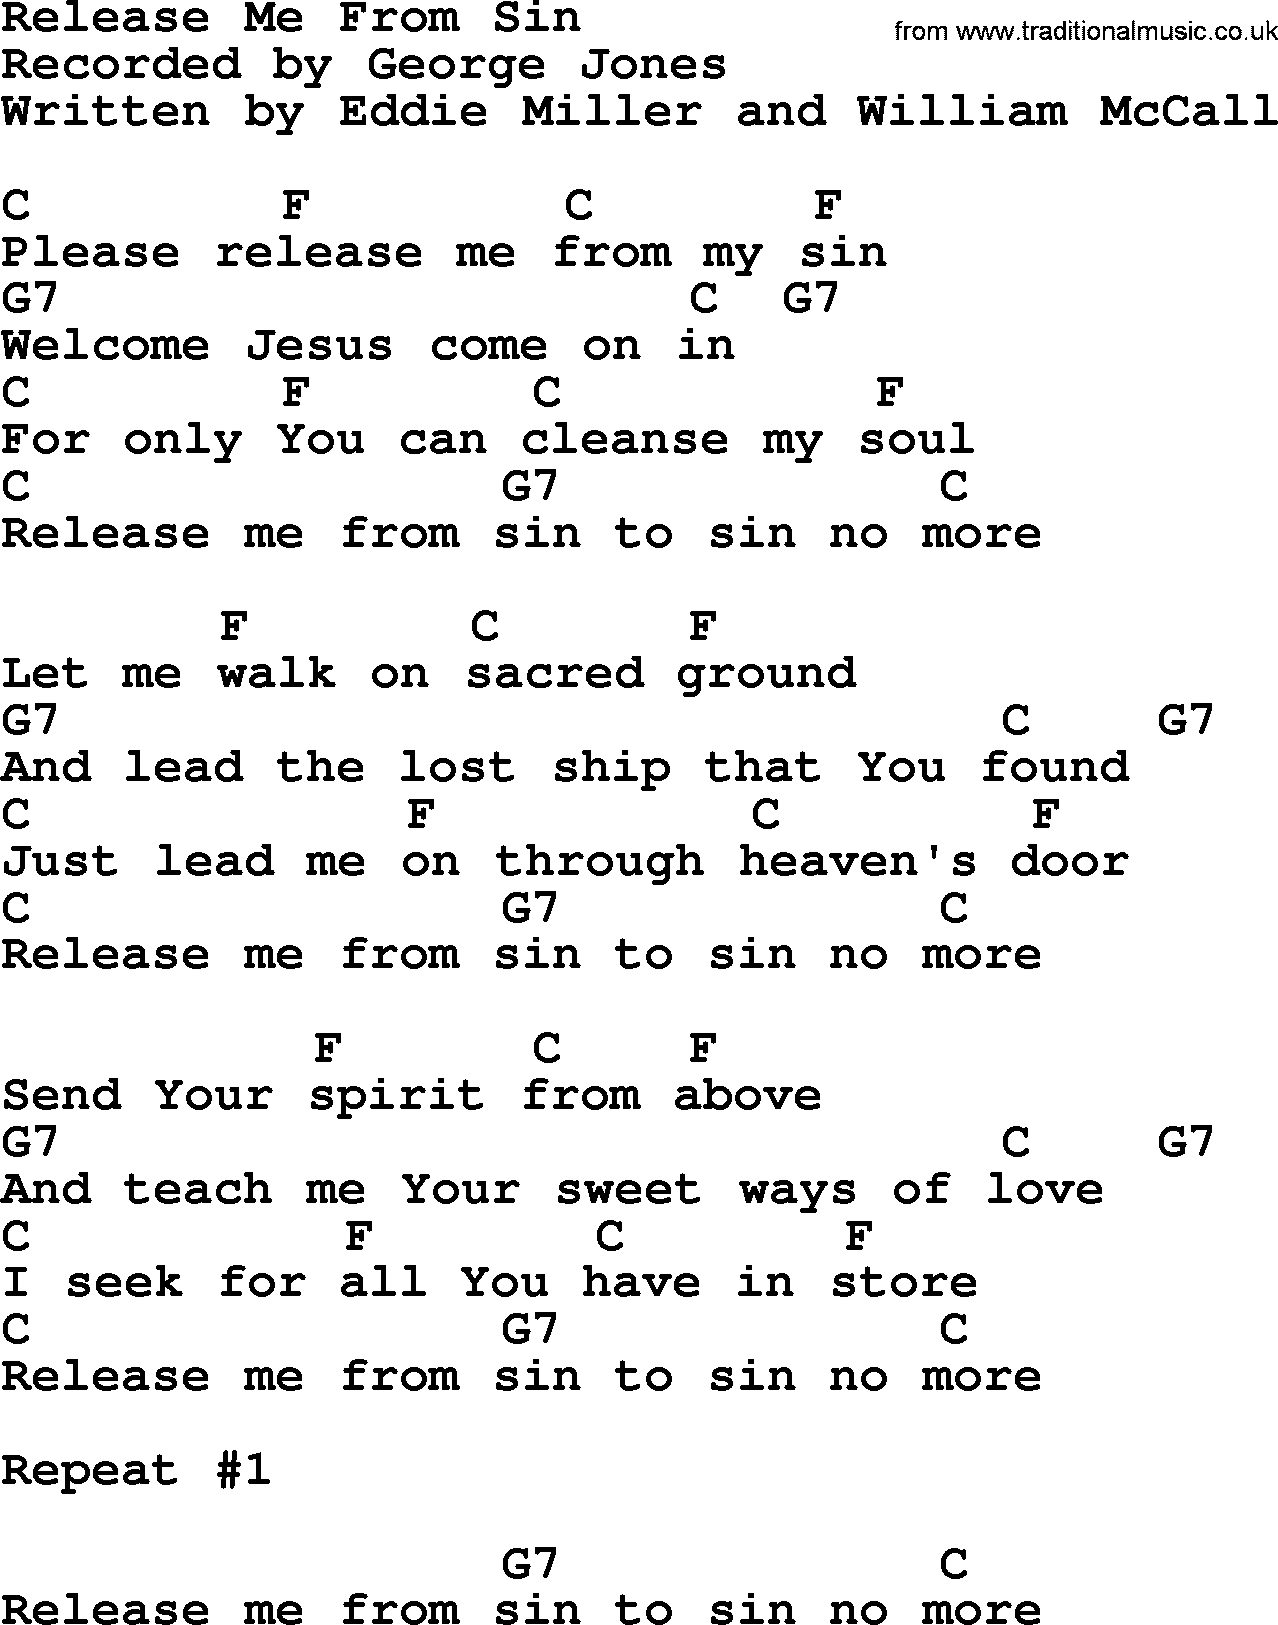 Release Me From Sin by George Jones - Counrty song lyrics and chords